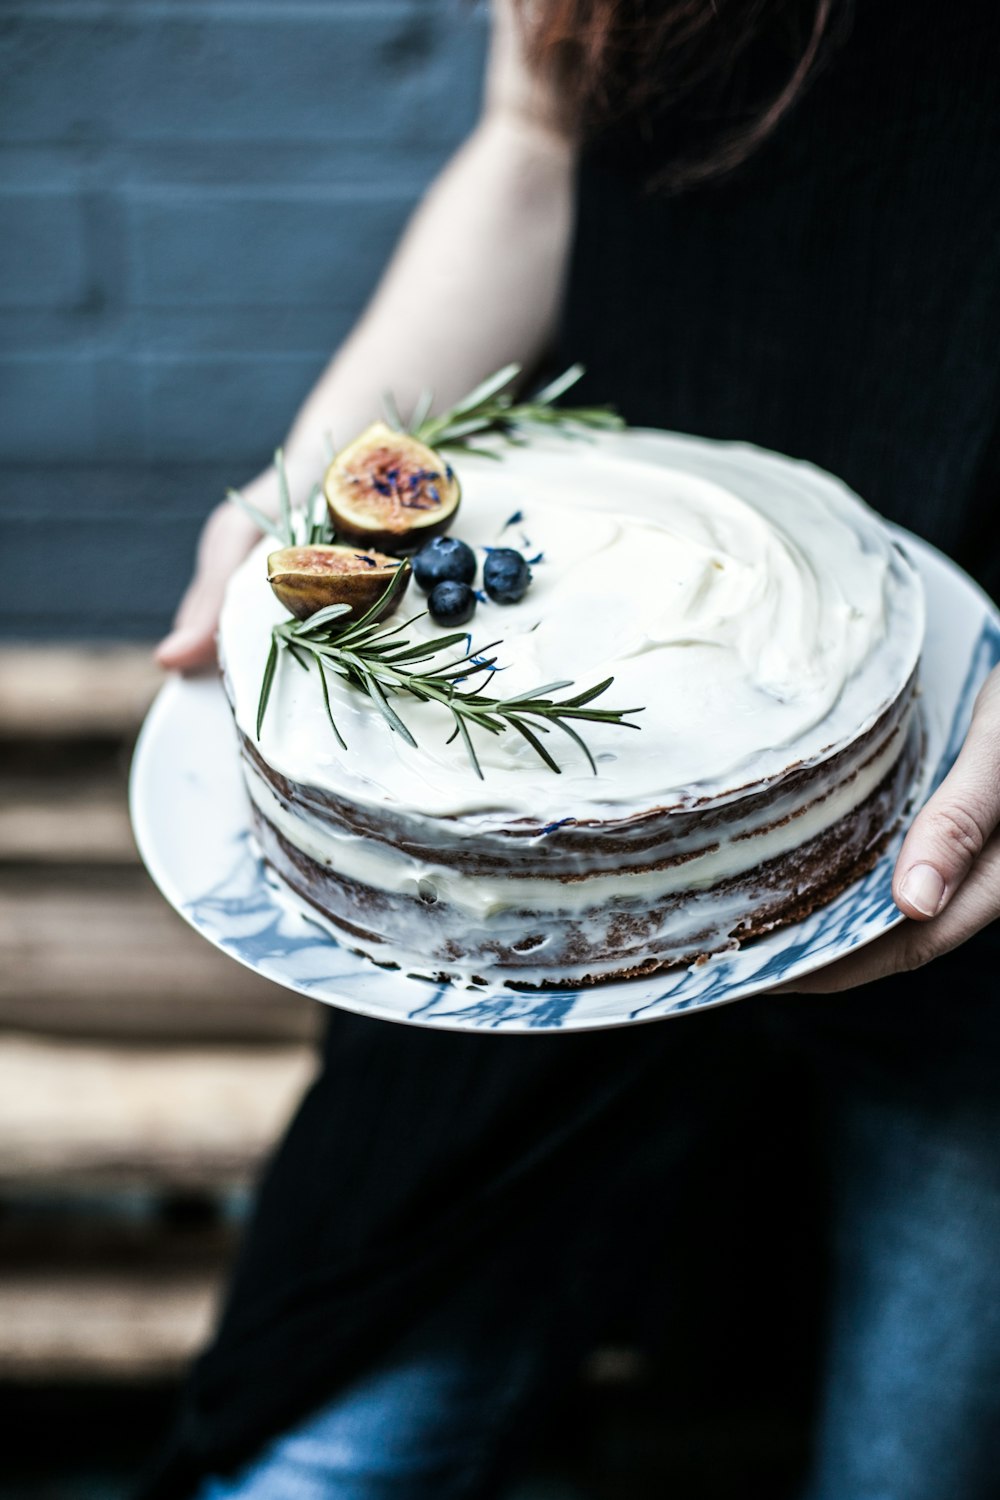 person holding round white icing-covered cake with blue berry on top